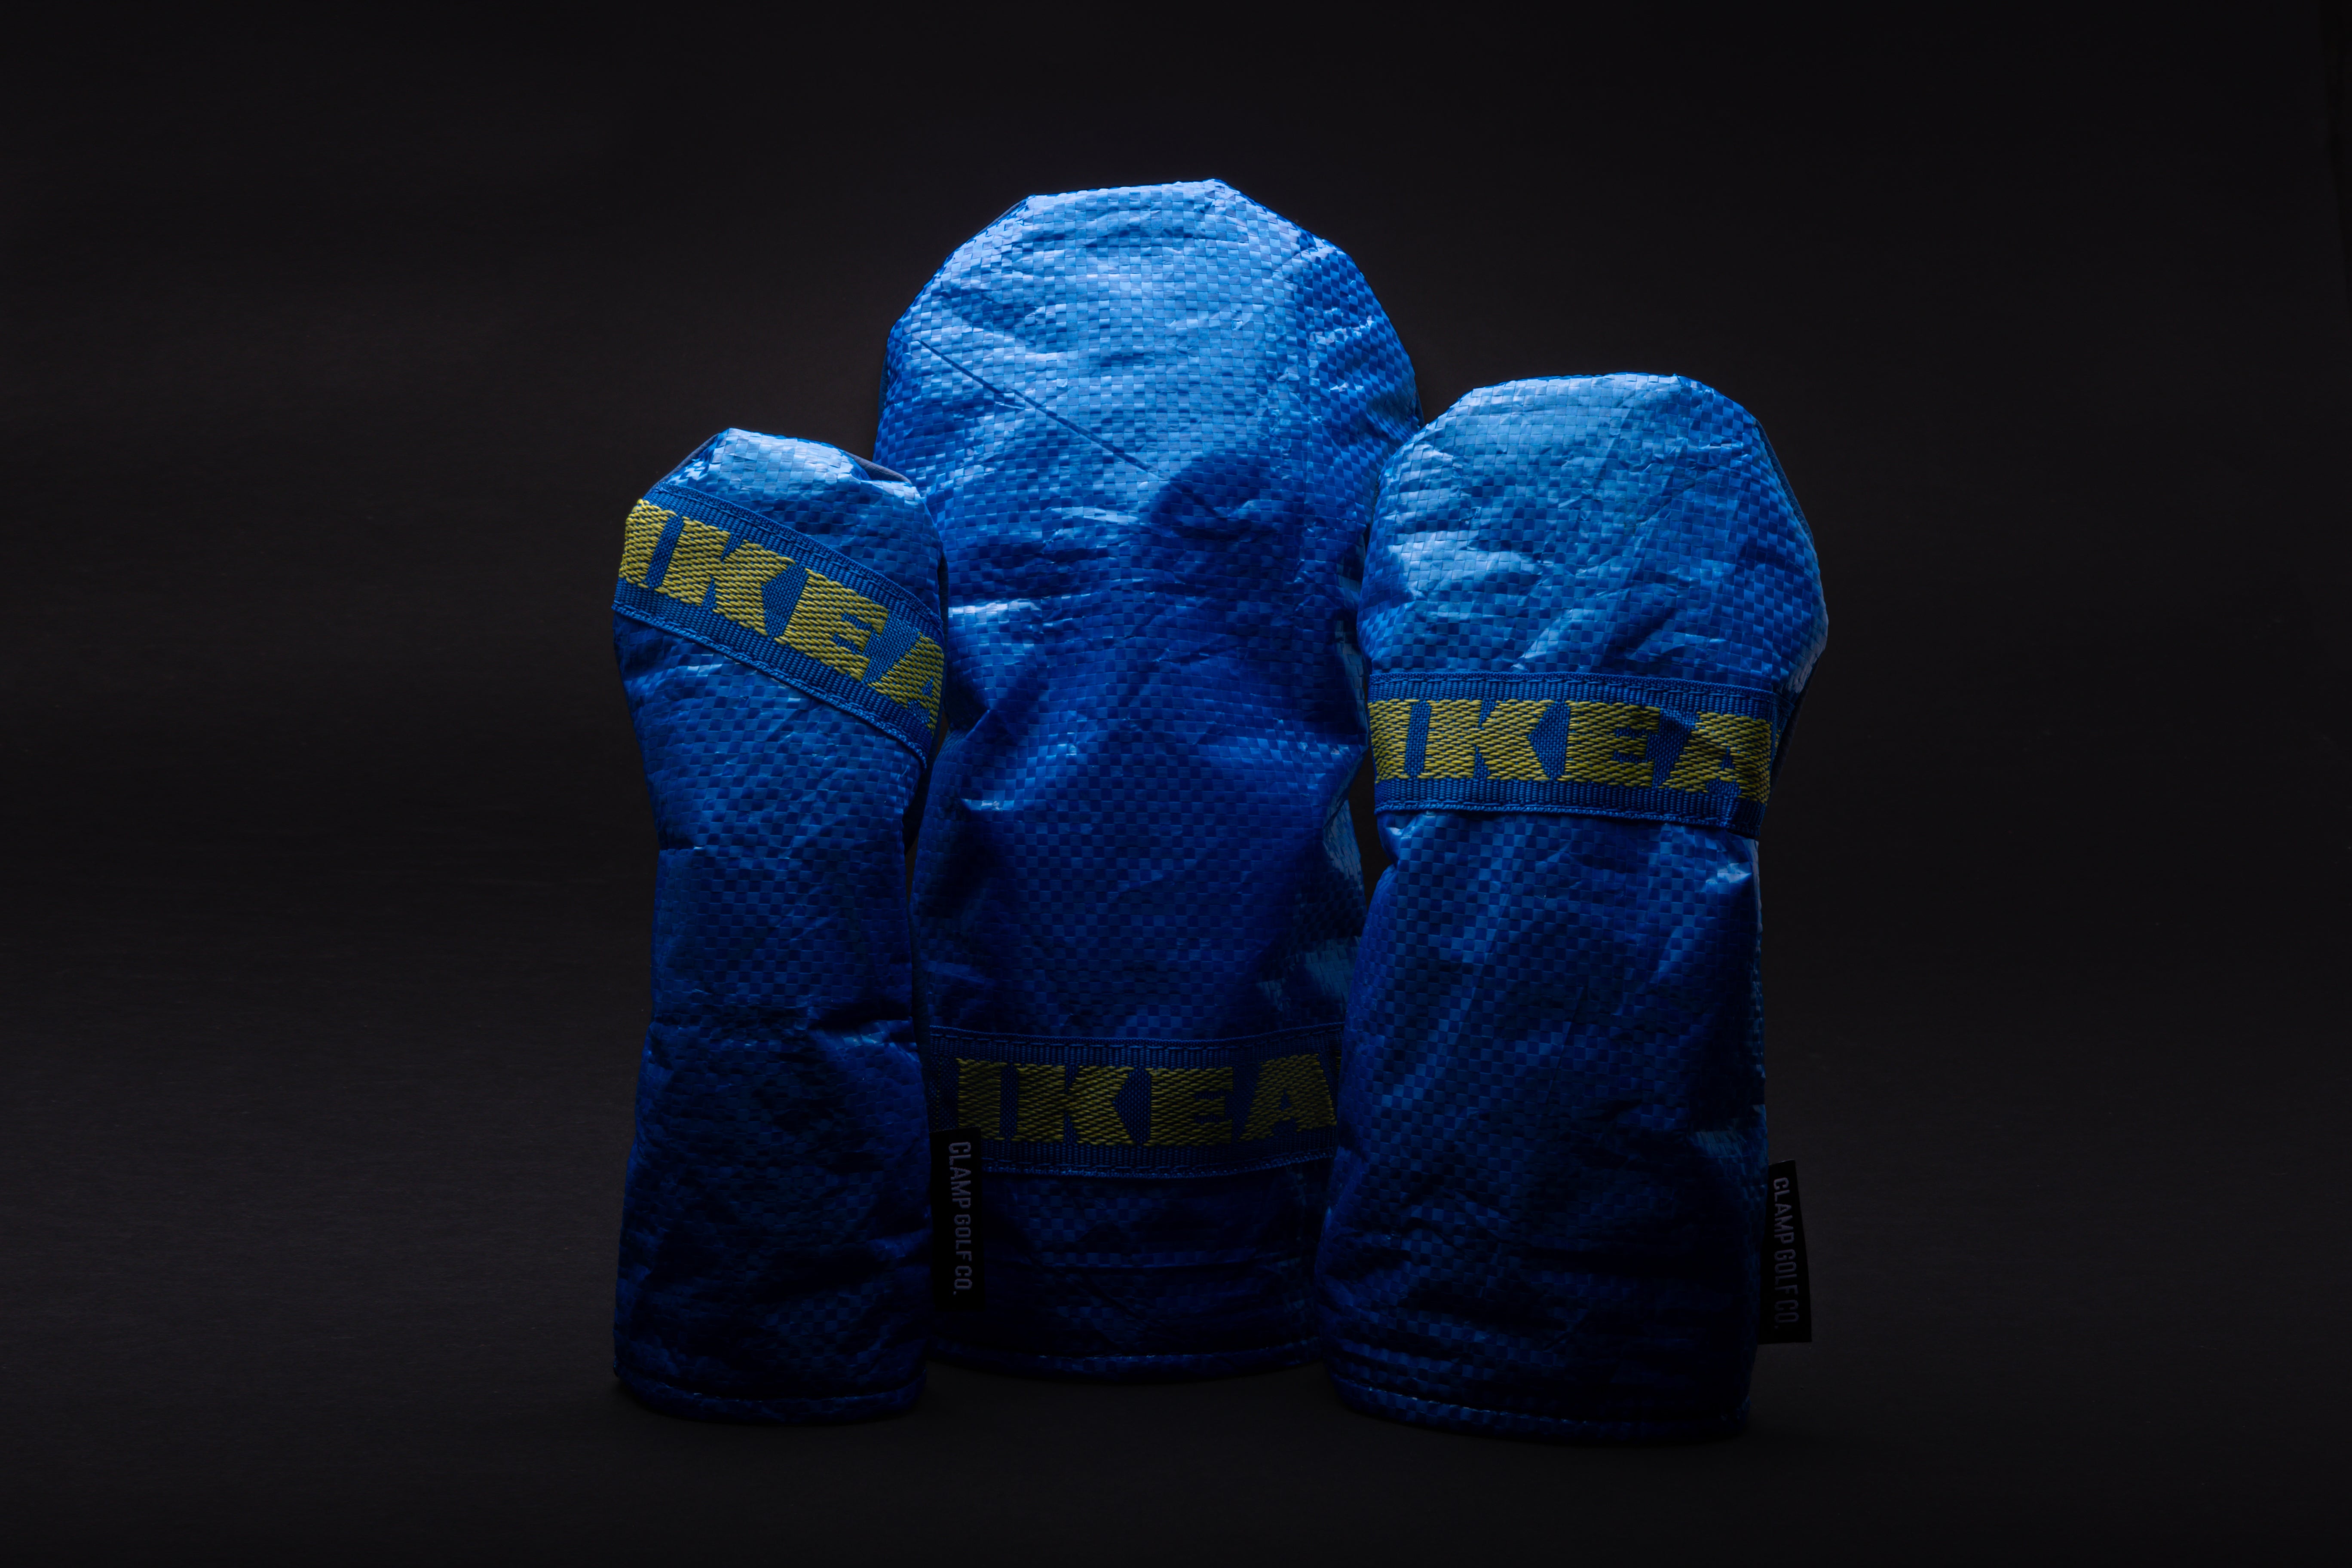 Reworked Ikea Covers